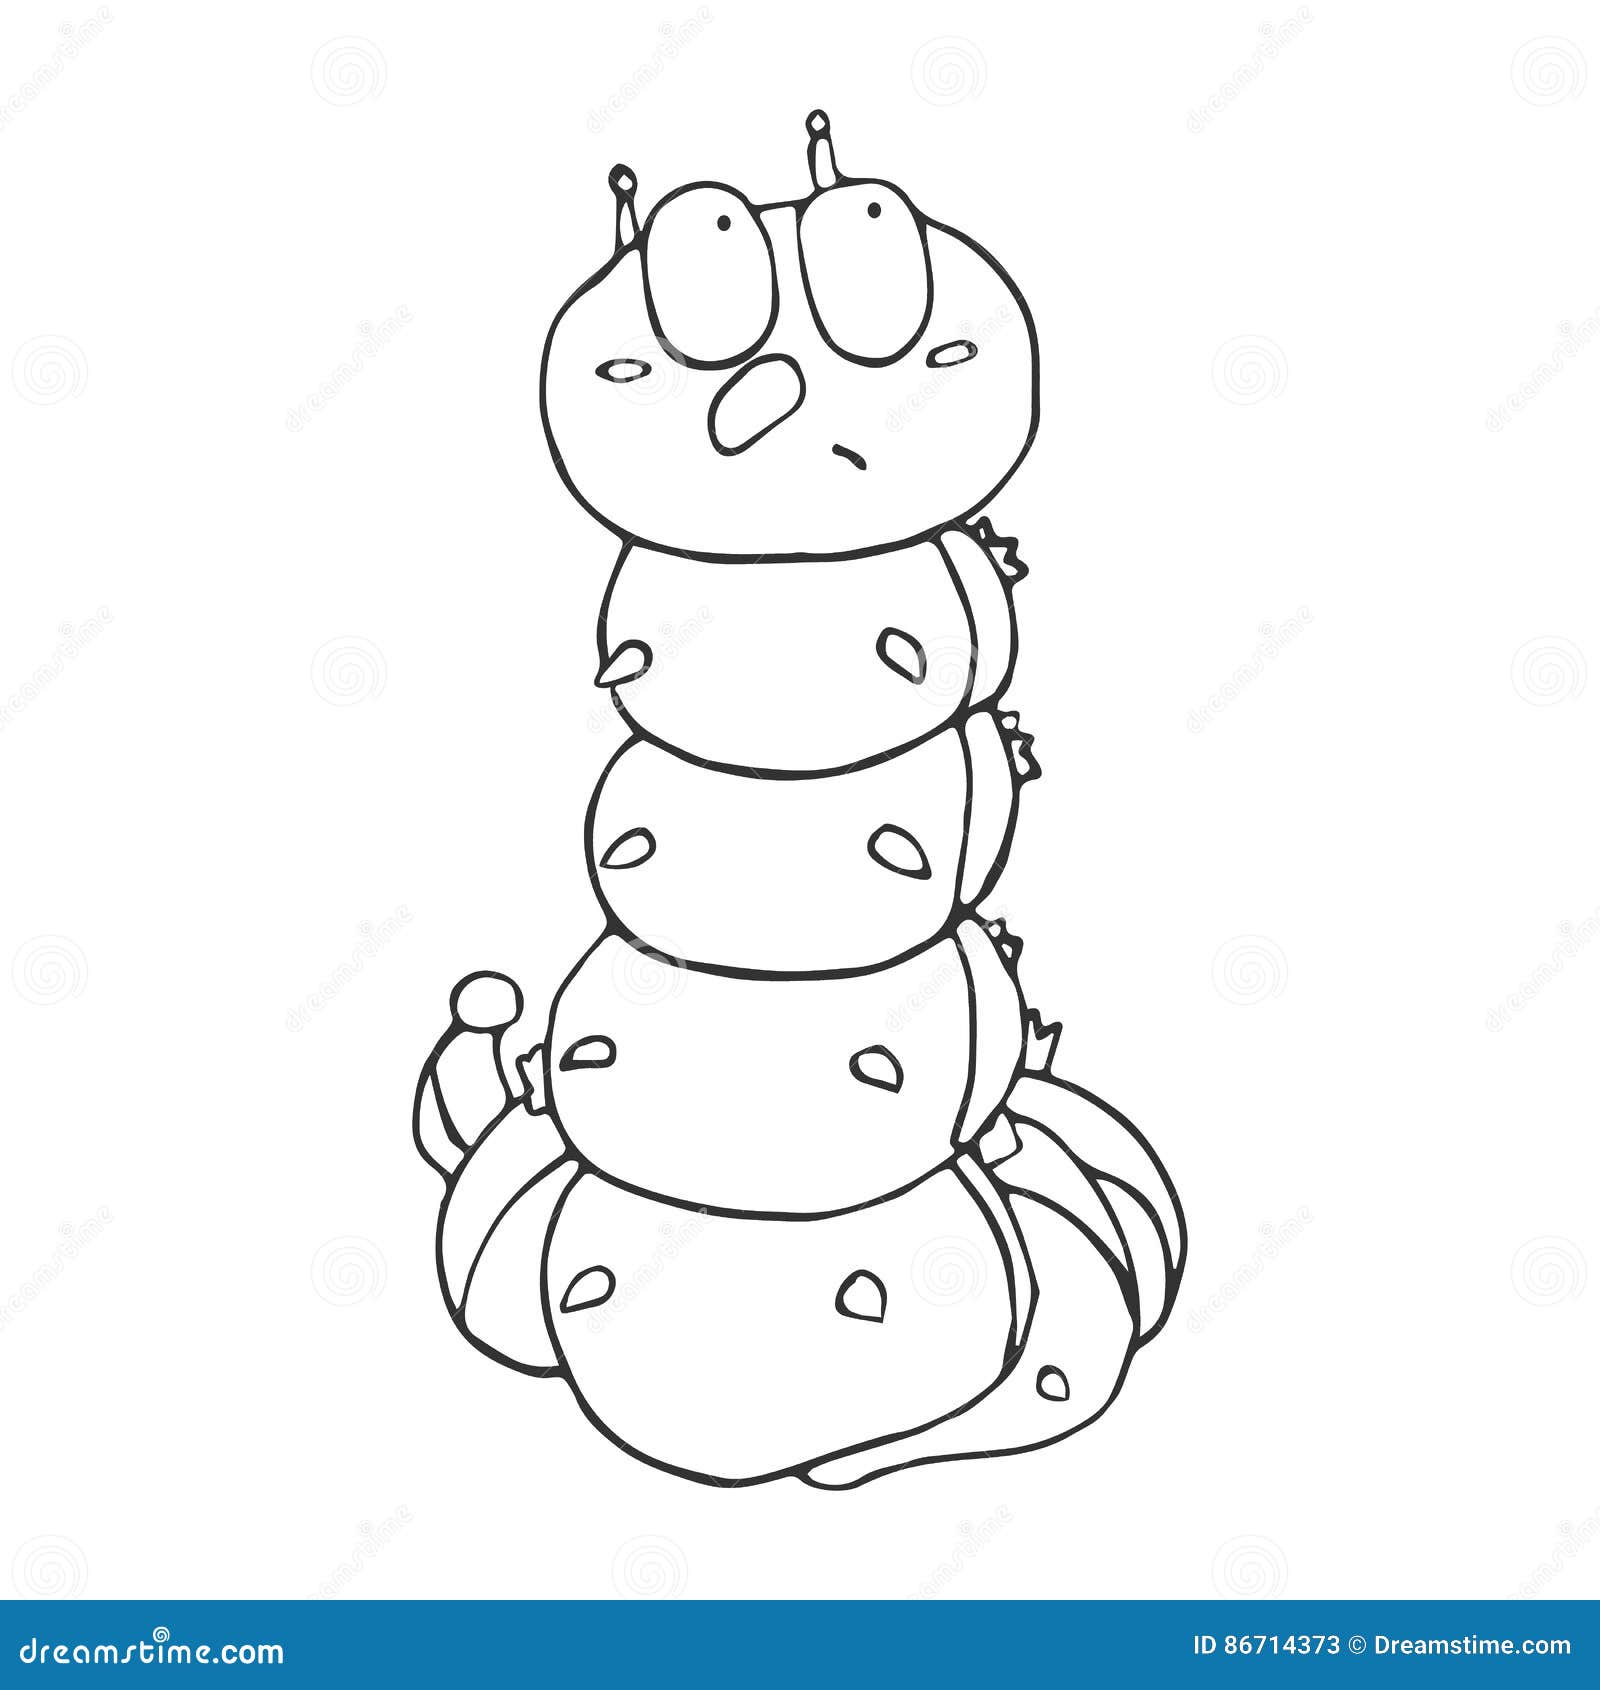 How to Draw a Caterpillar  Step by Step Guide for Kids and Beginners   Easy Peasy and Fun